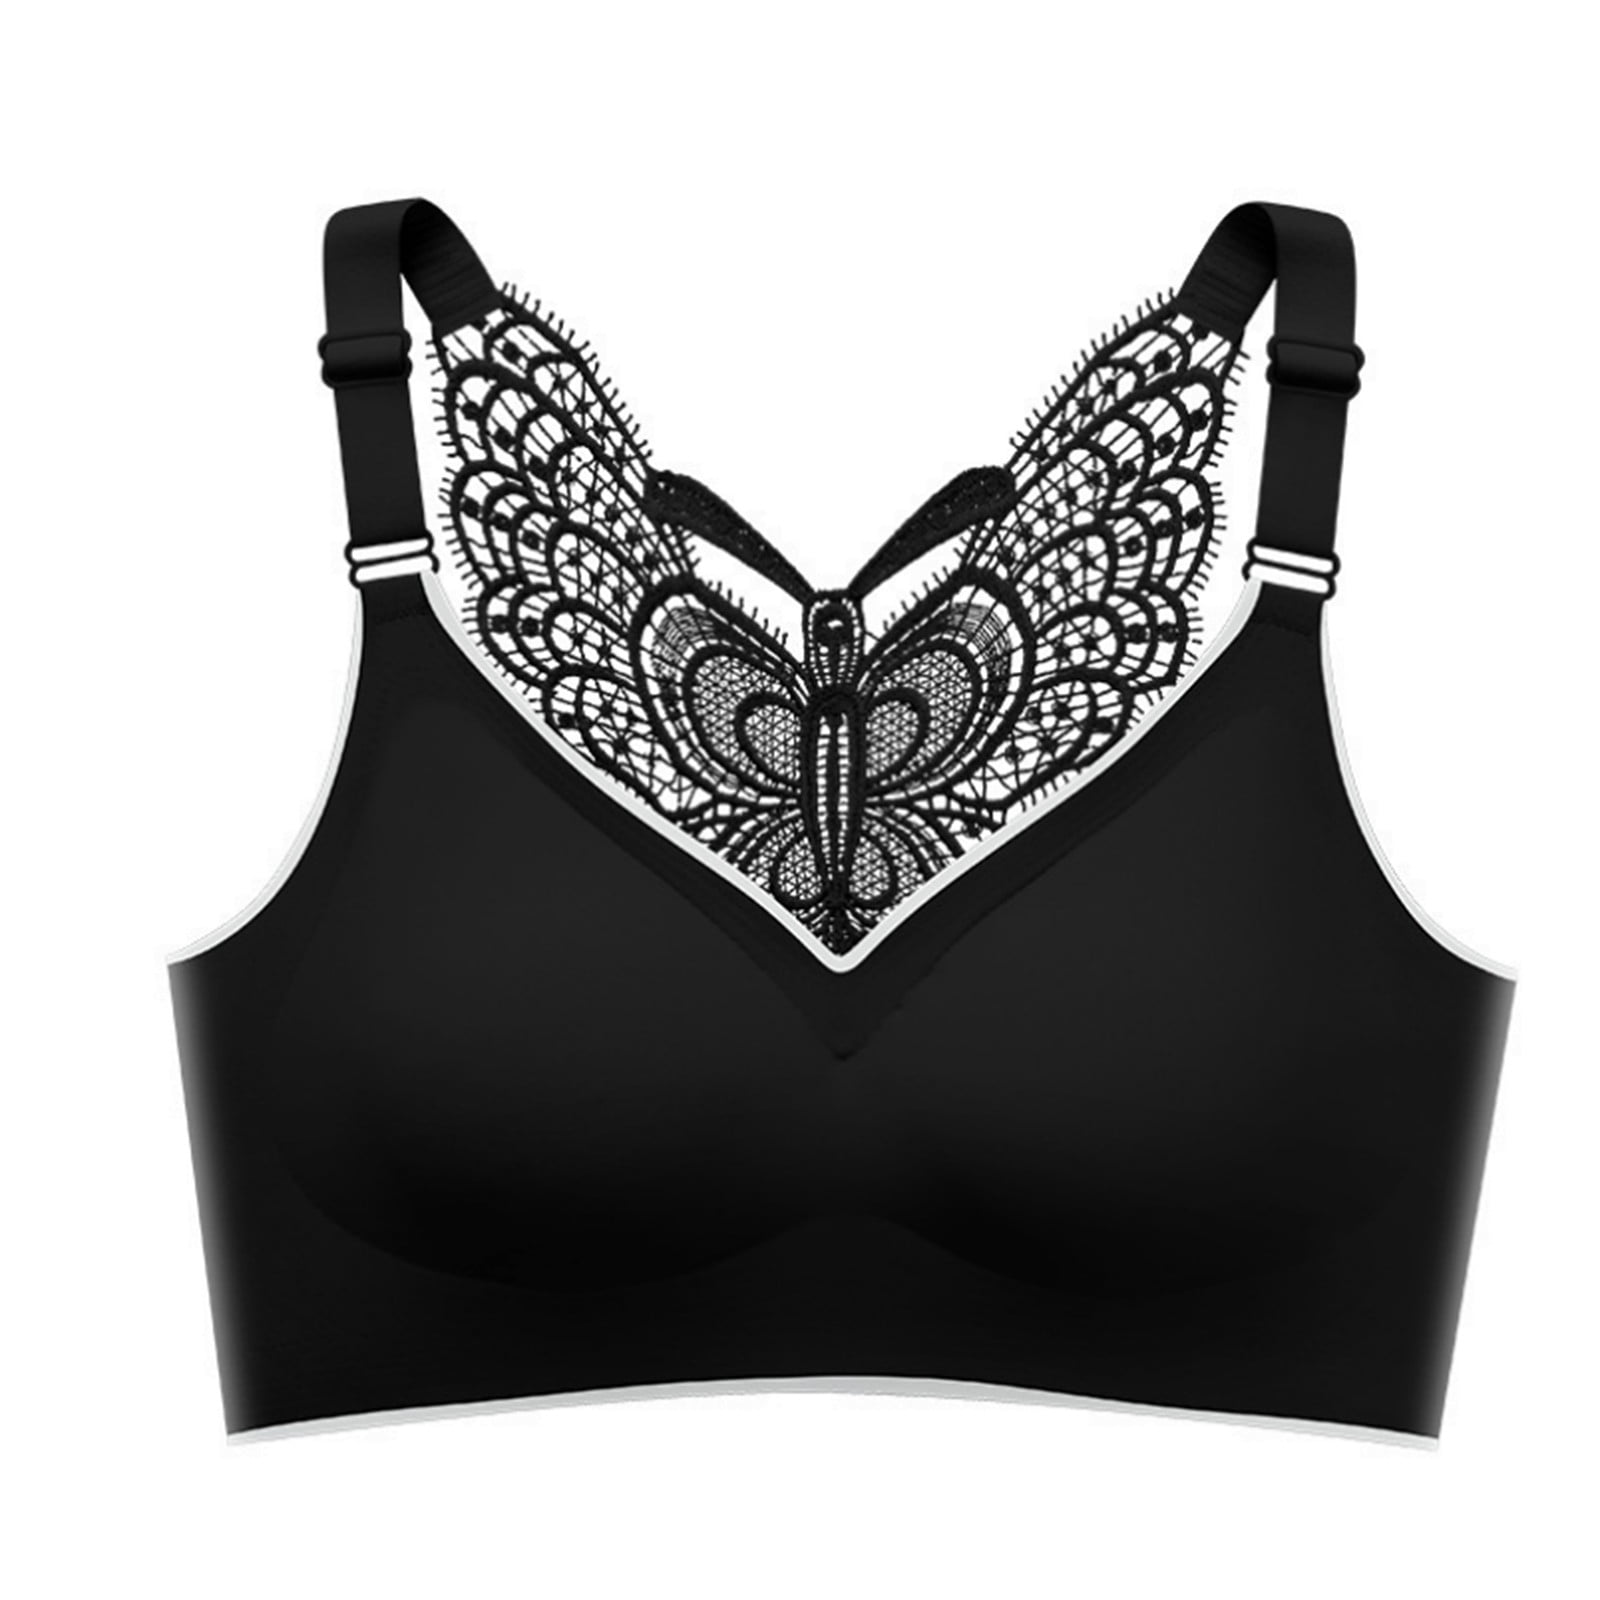 Buy Fashion Underwear Lace Bralette Bras Adjustable Push up Lingerie  Butterfly Back Seamless Racerback Bra Girls Style B Black Cup Size 75B at